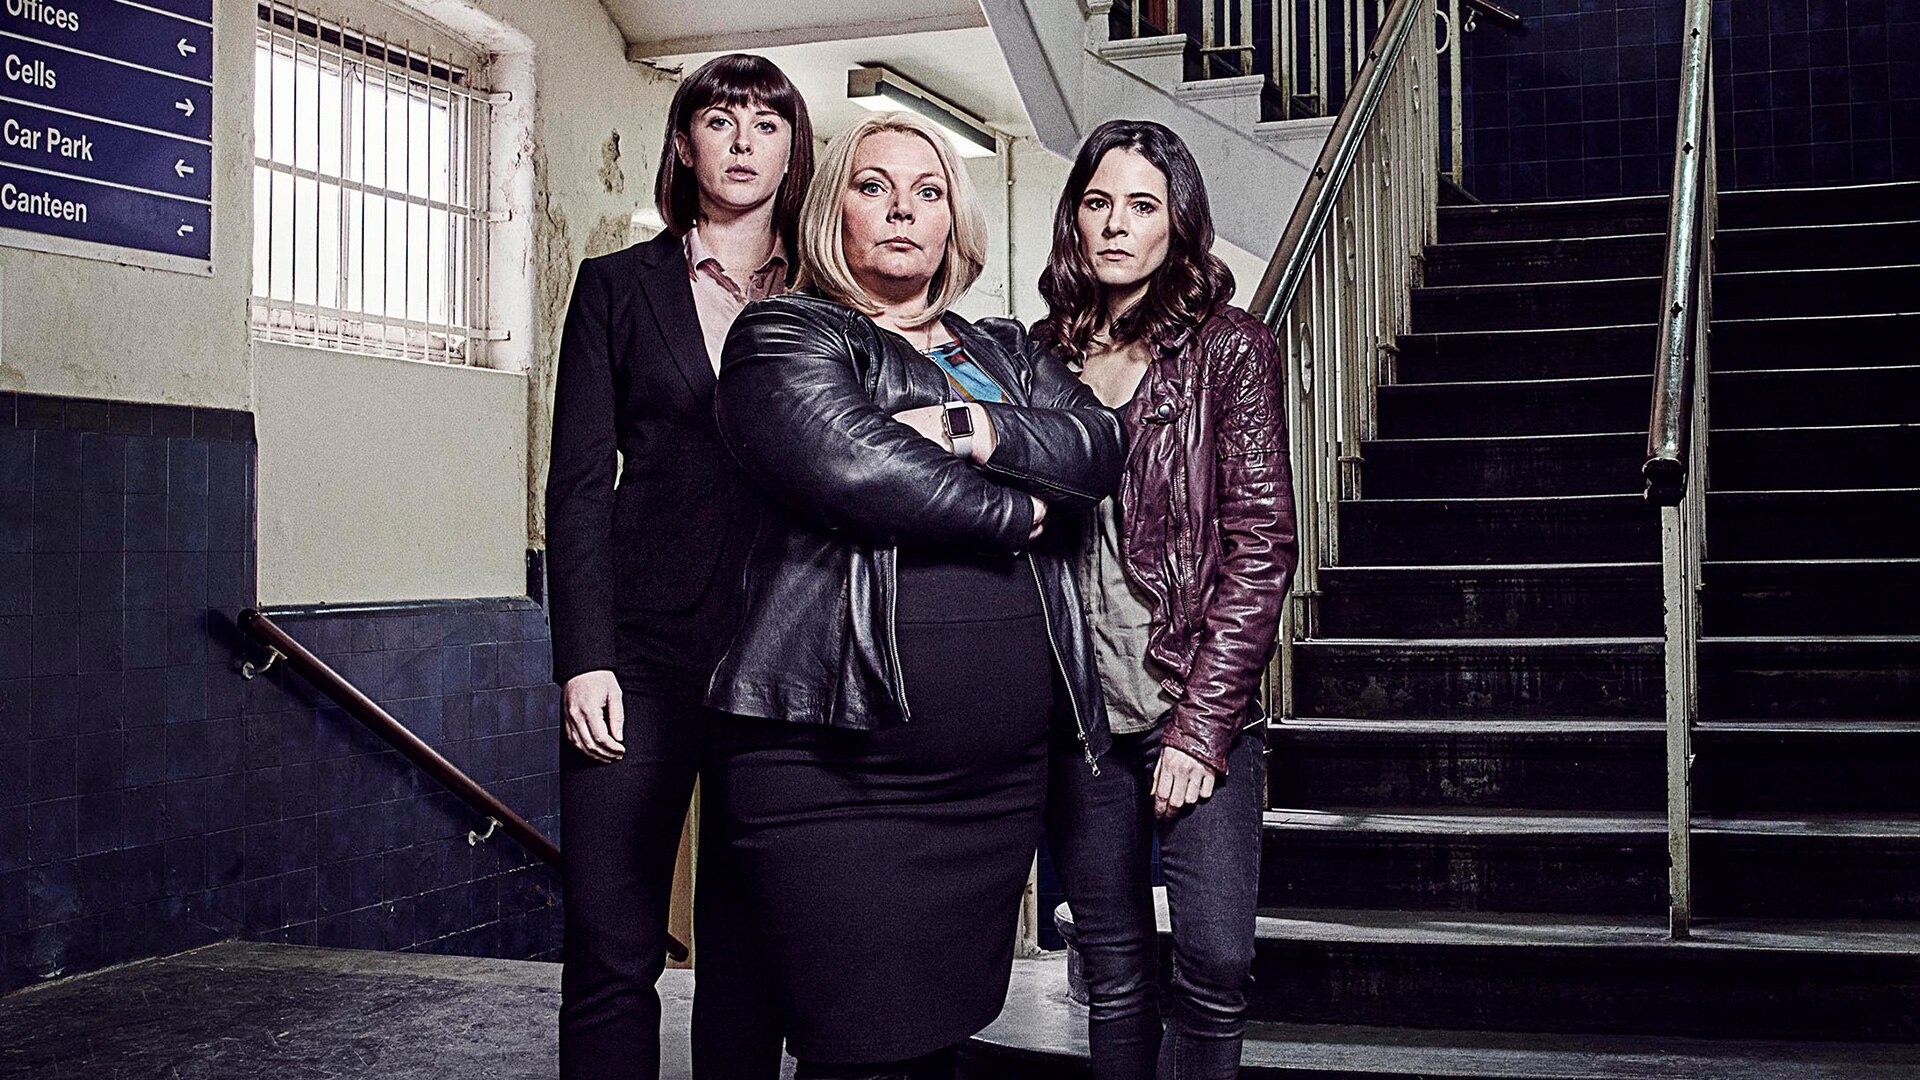 No offence - All 4